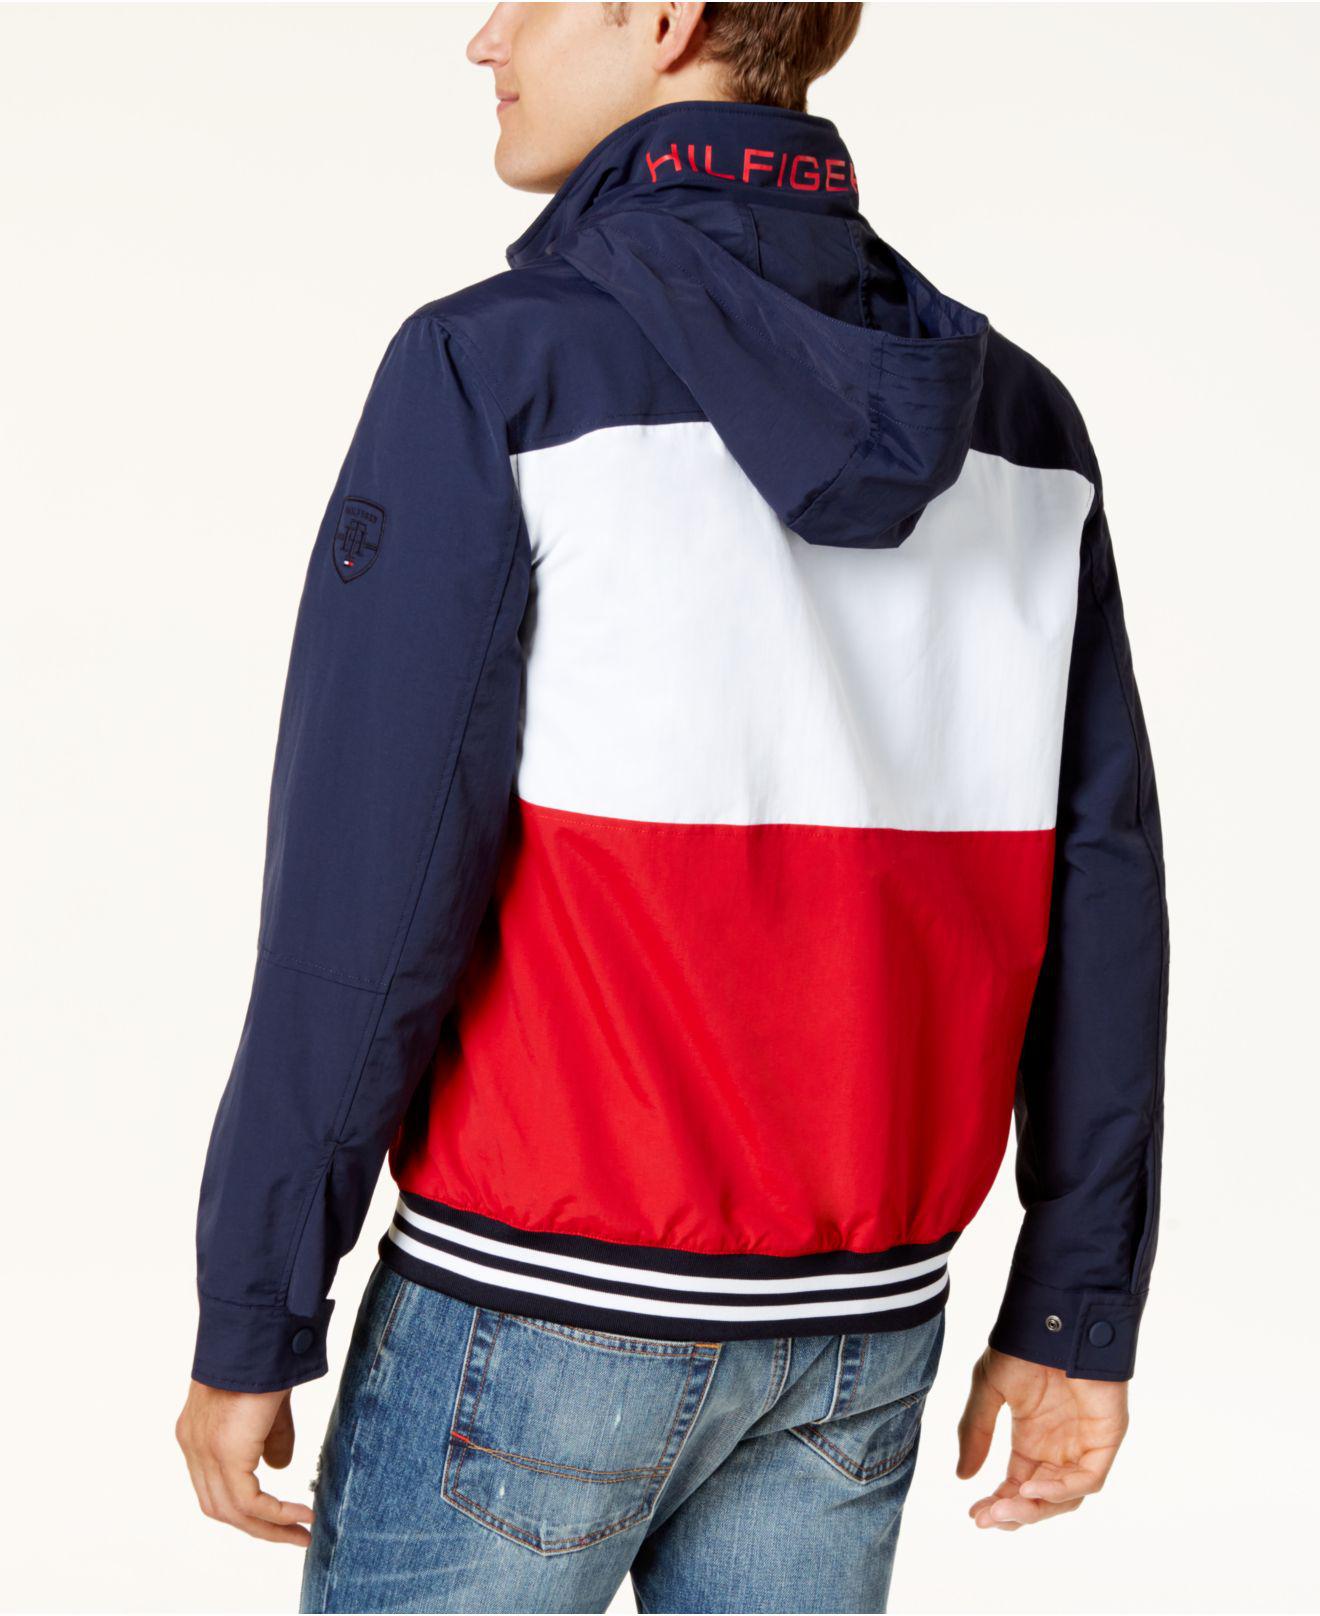 tommy hilfiger red white and blue jacket